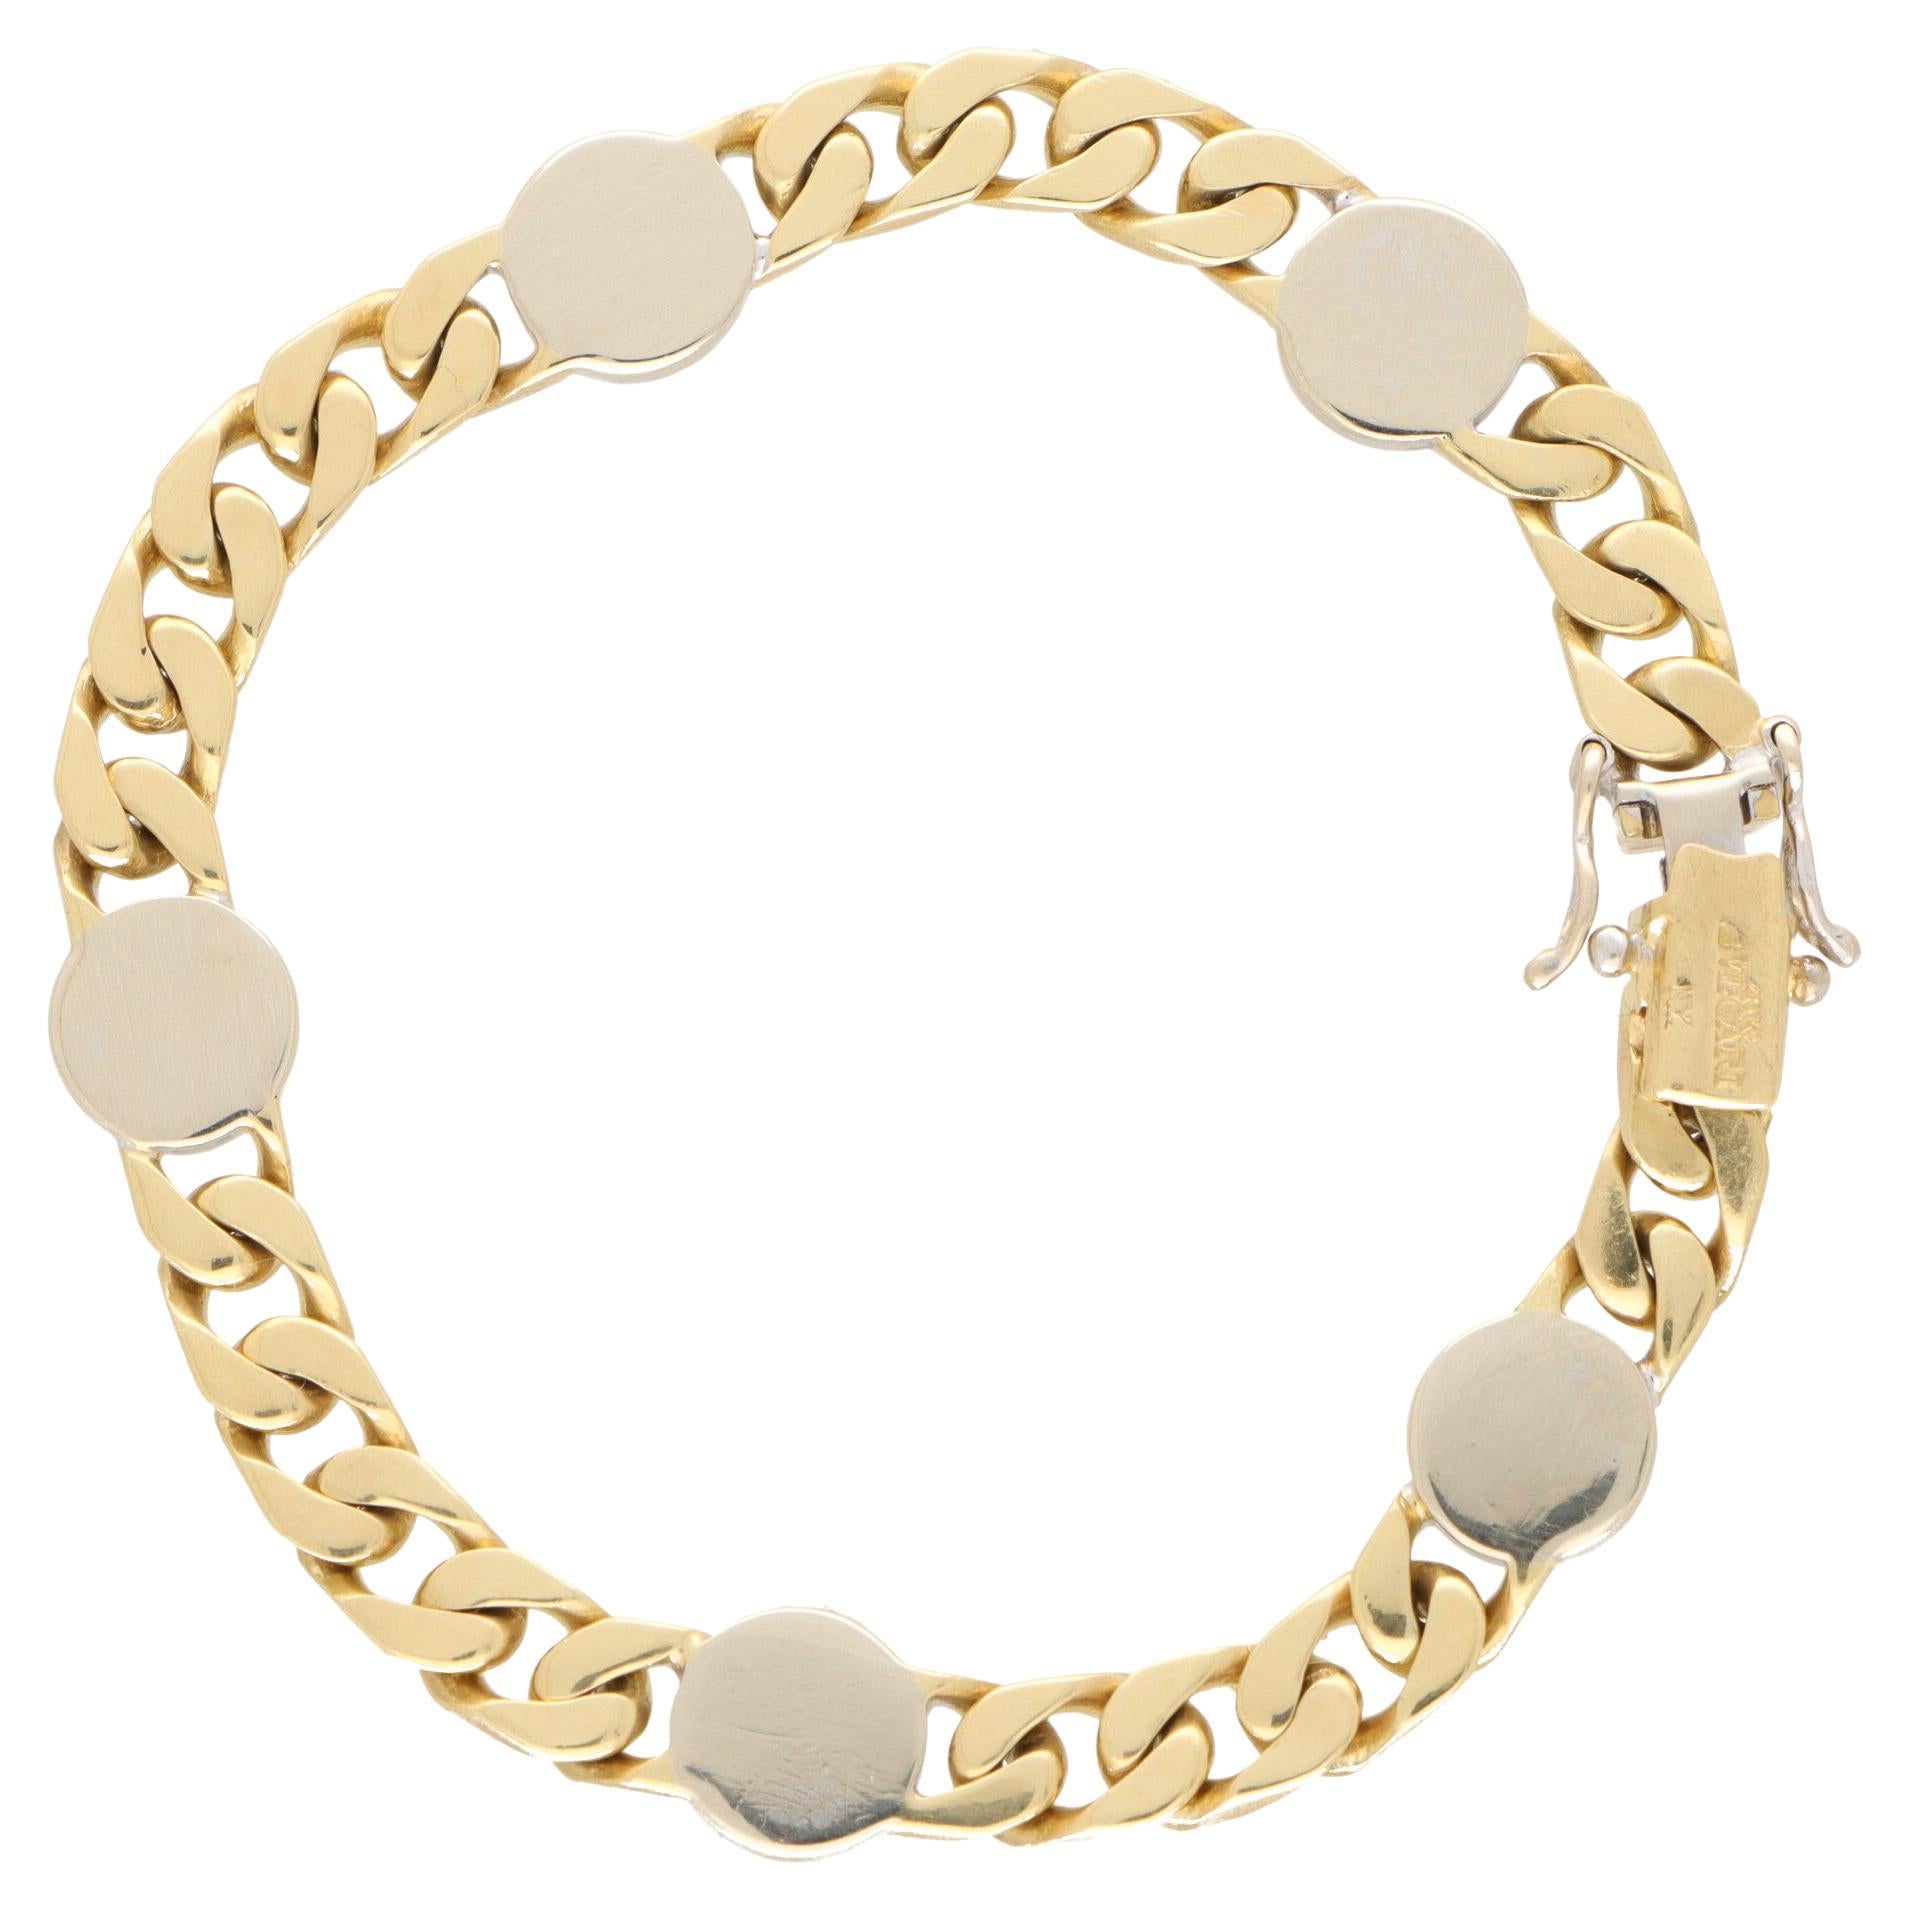 Vintage Bvlgari Disc Bracelet Set in 18k White and Yellow Gold For Sale